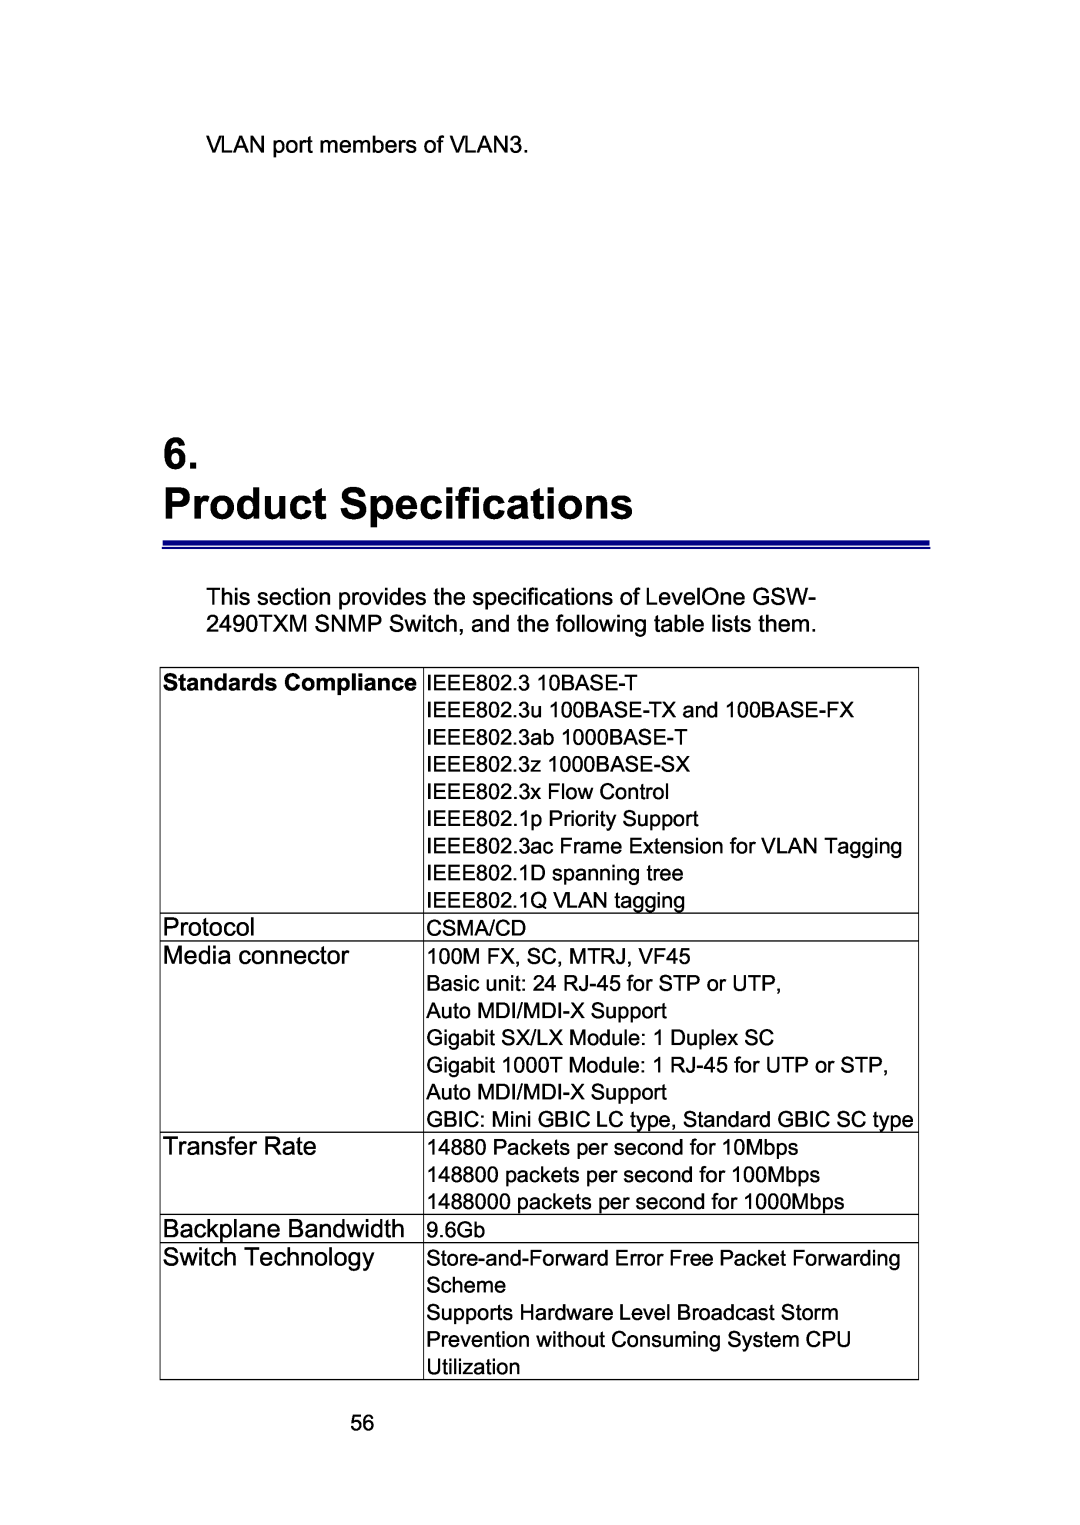 LevelOne GSW-2490TXM manual Product Specifications, Protocol, Media connector, Transfer Rate, Backplane Bandwidth 